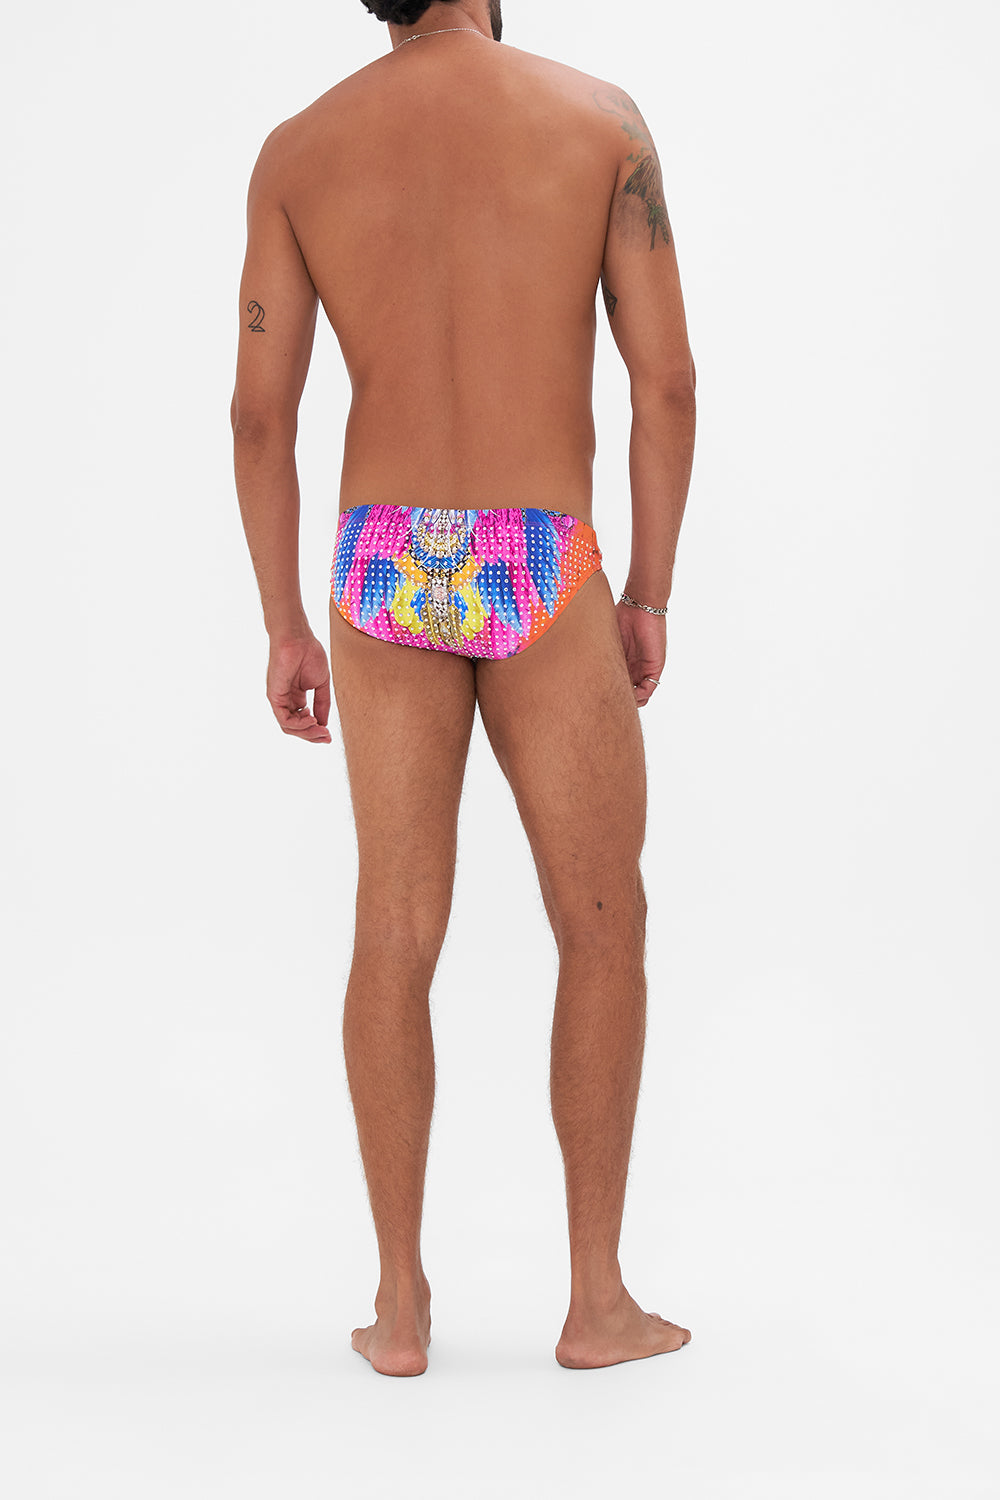 MENS ATHLETIC SWIM BRIEF - FULLY CRYSTALLED DANCING WITH DESTINY